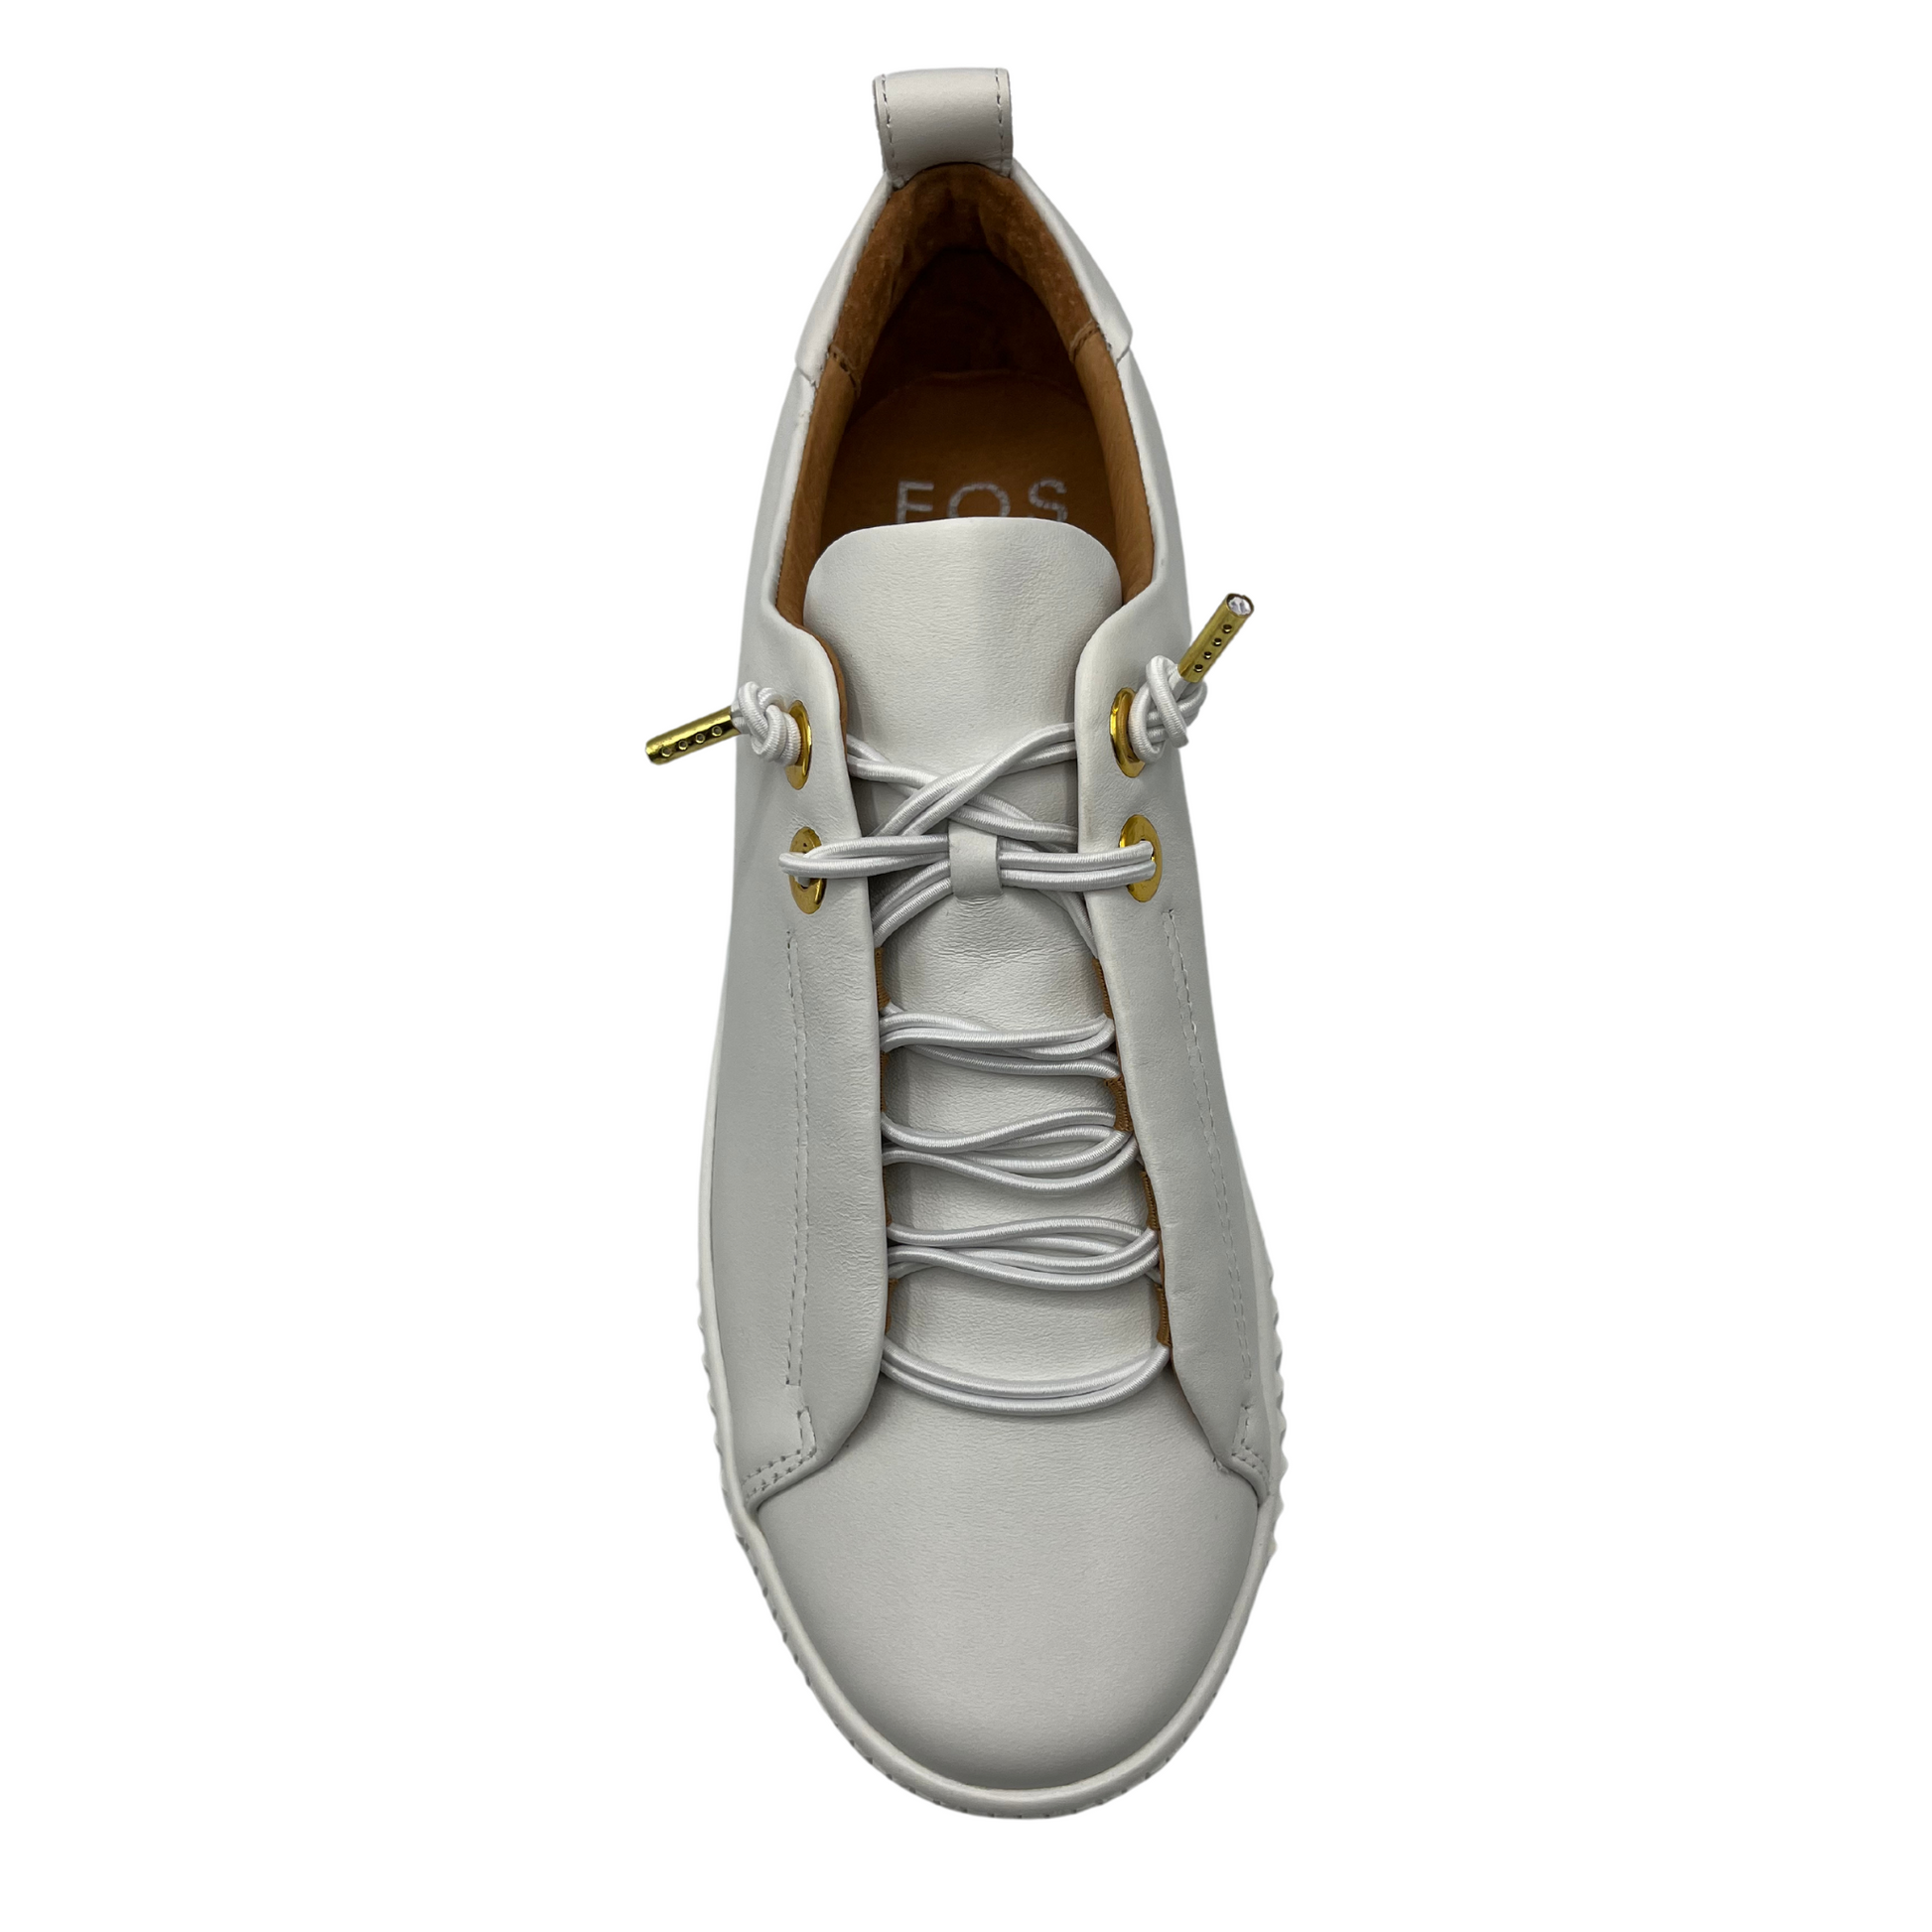 Top view of white leather sneaker with matching laces and white rubber outsole